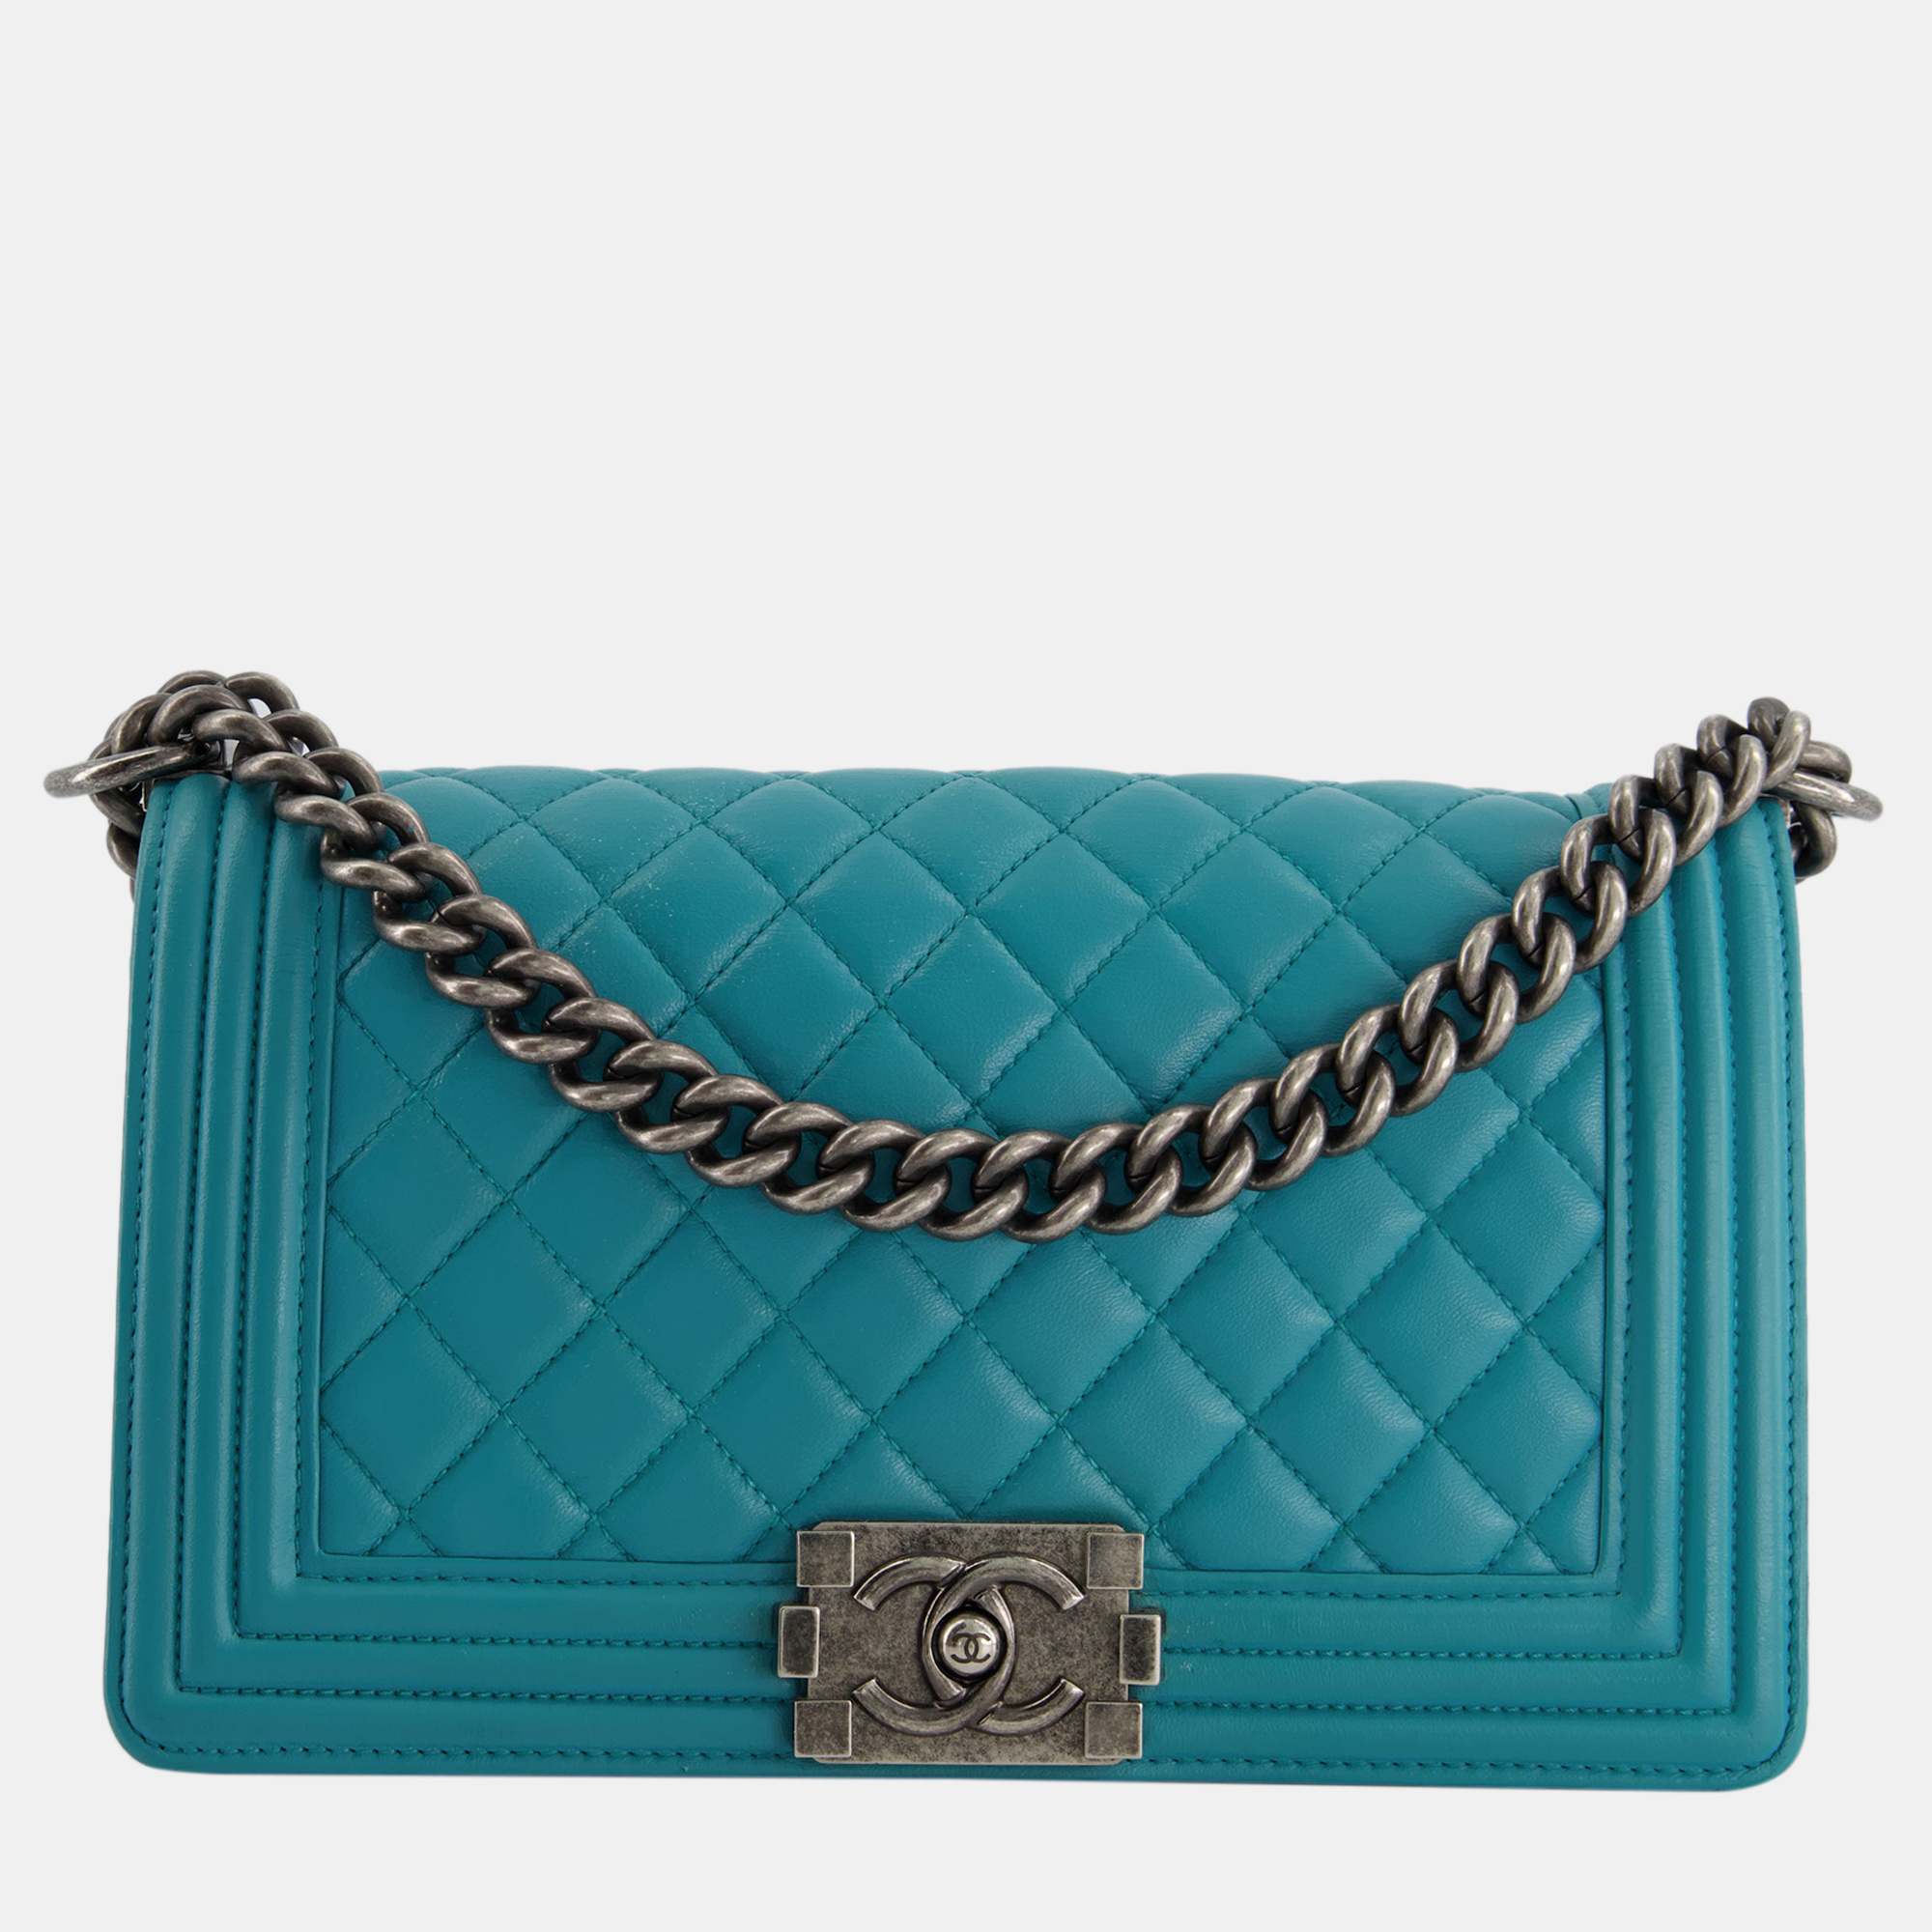 

Chanel Teal Blue Medium Boy Bag in Lambskin Leather with Ruthenium Hardware